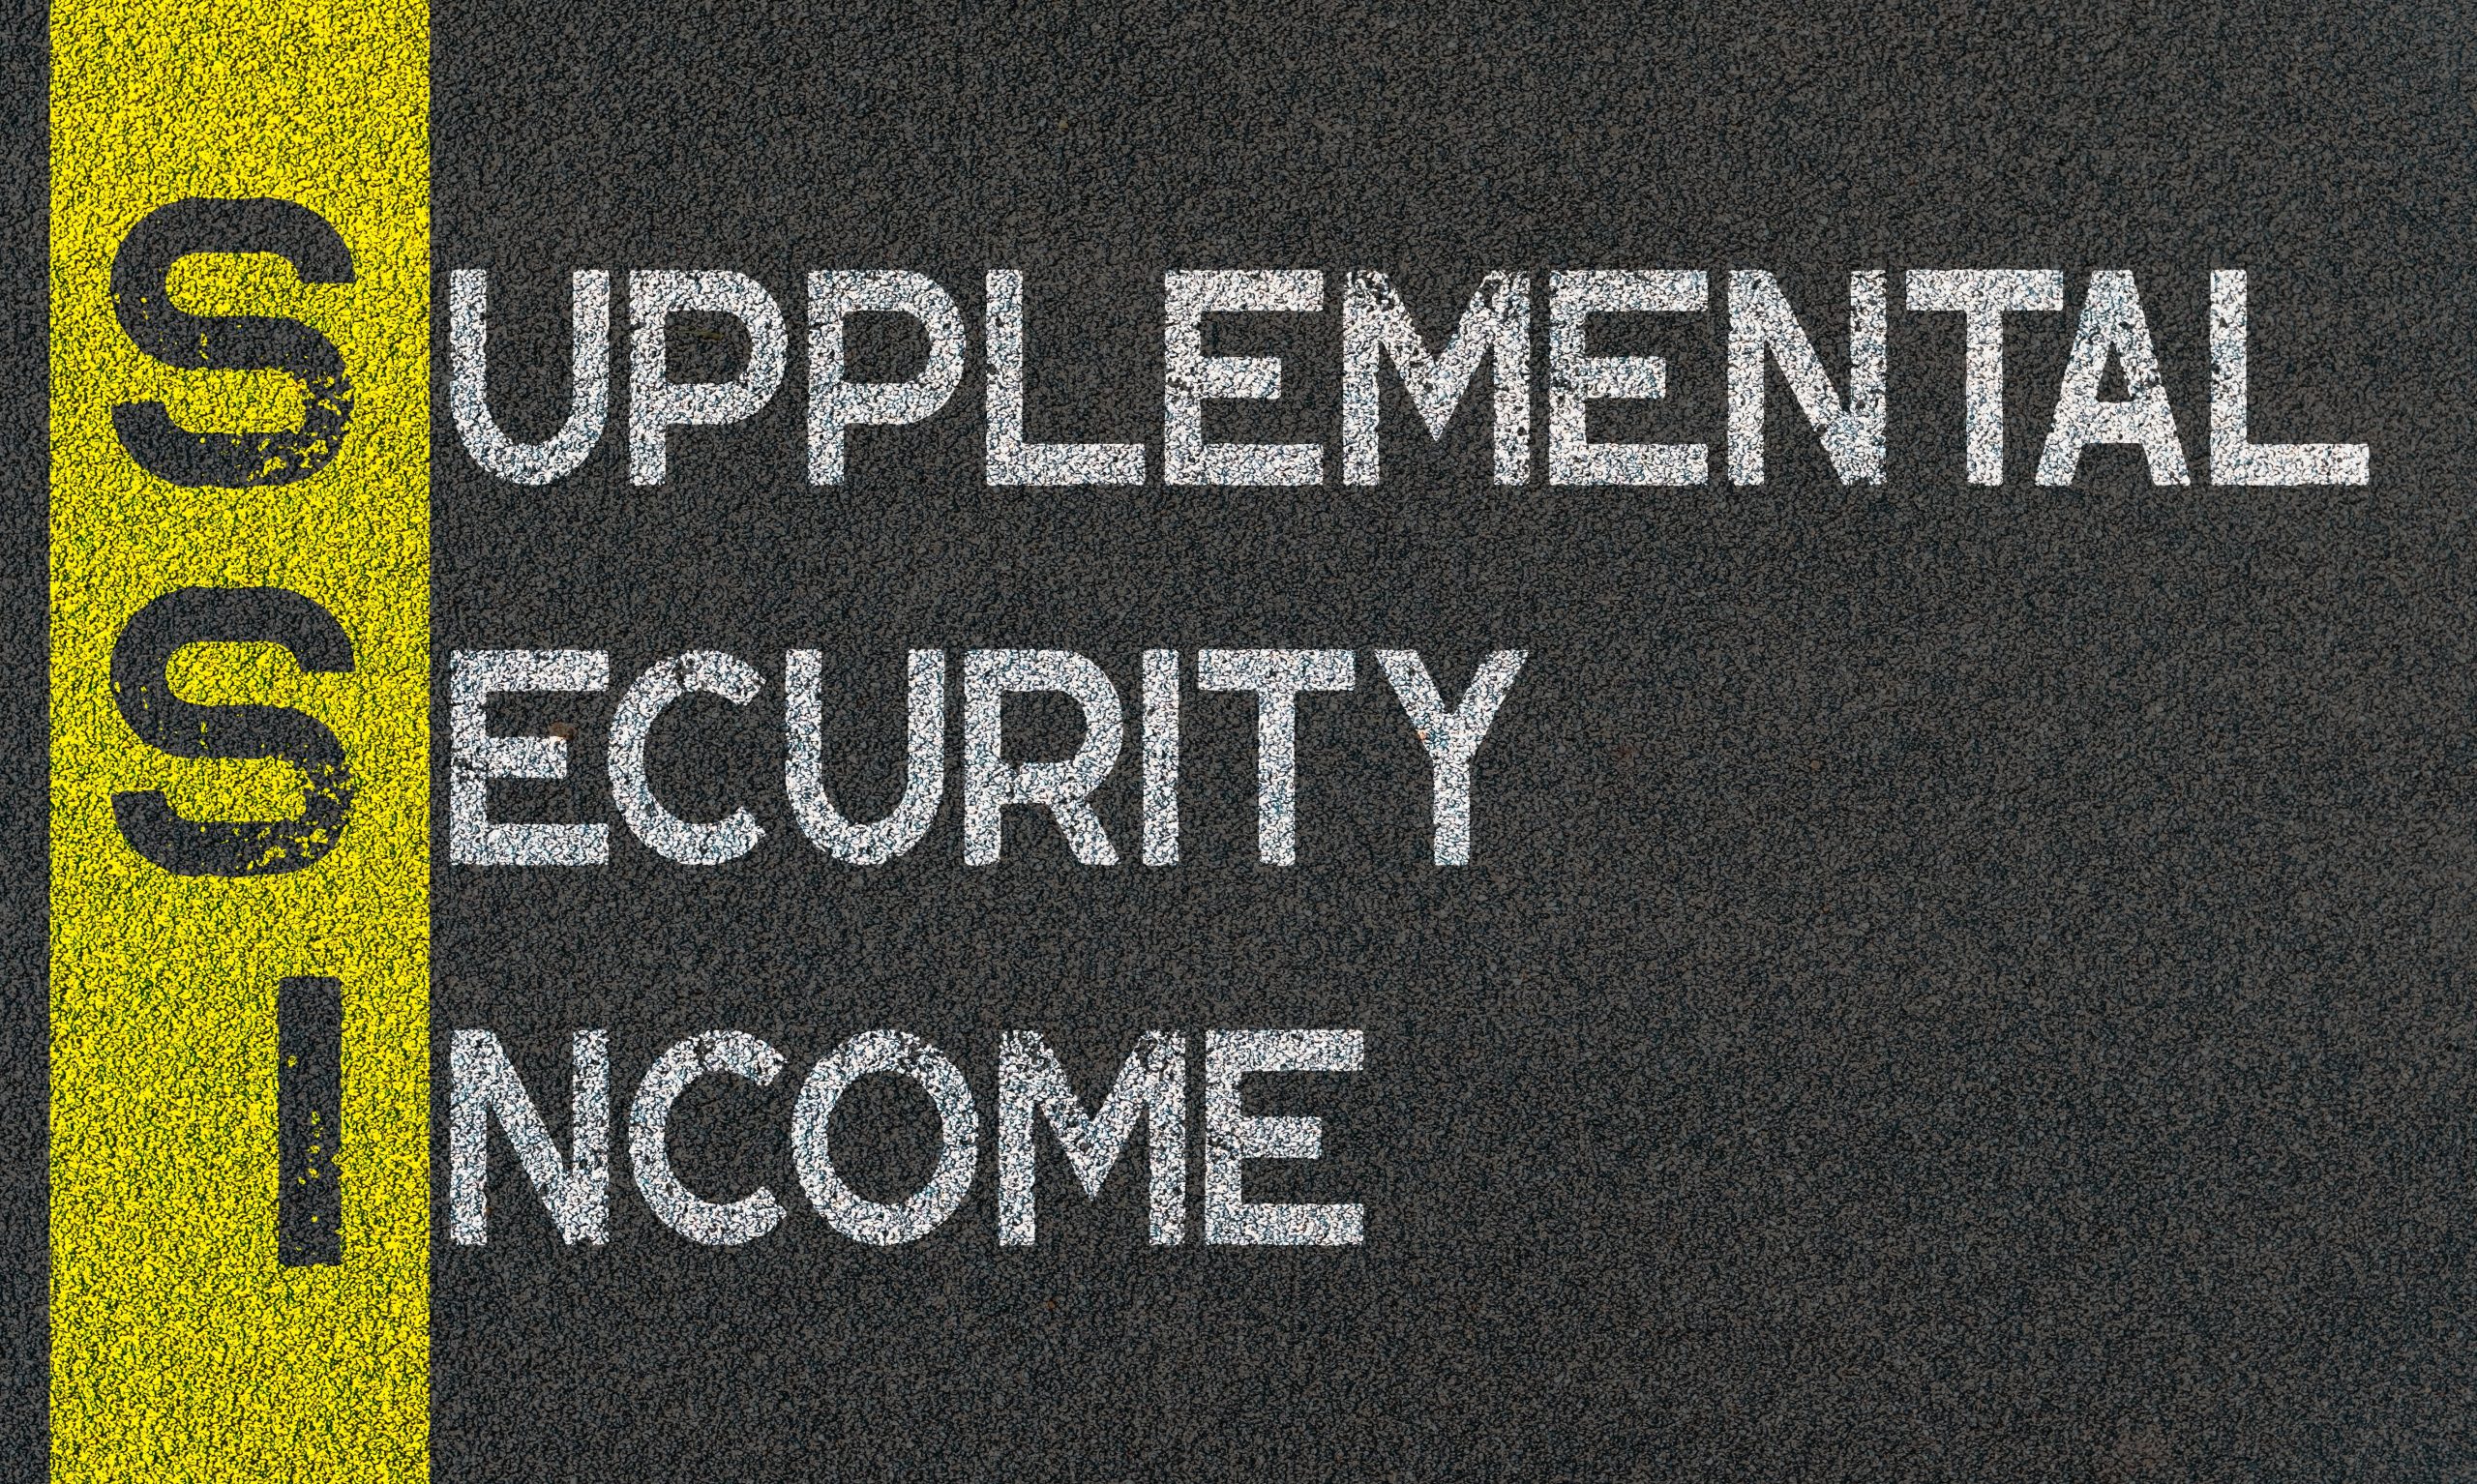 Supplemental Security Income (SSI) illustration